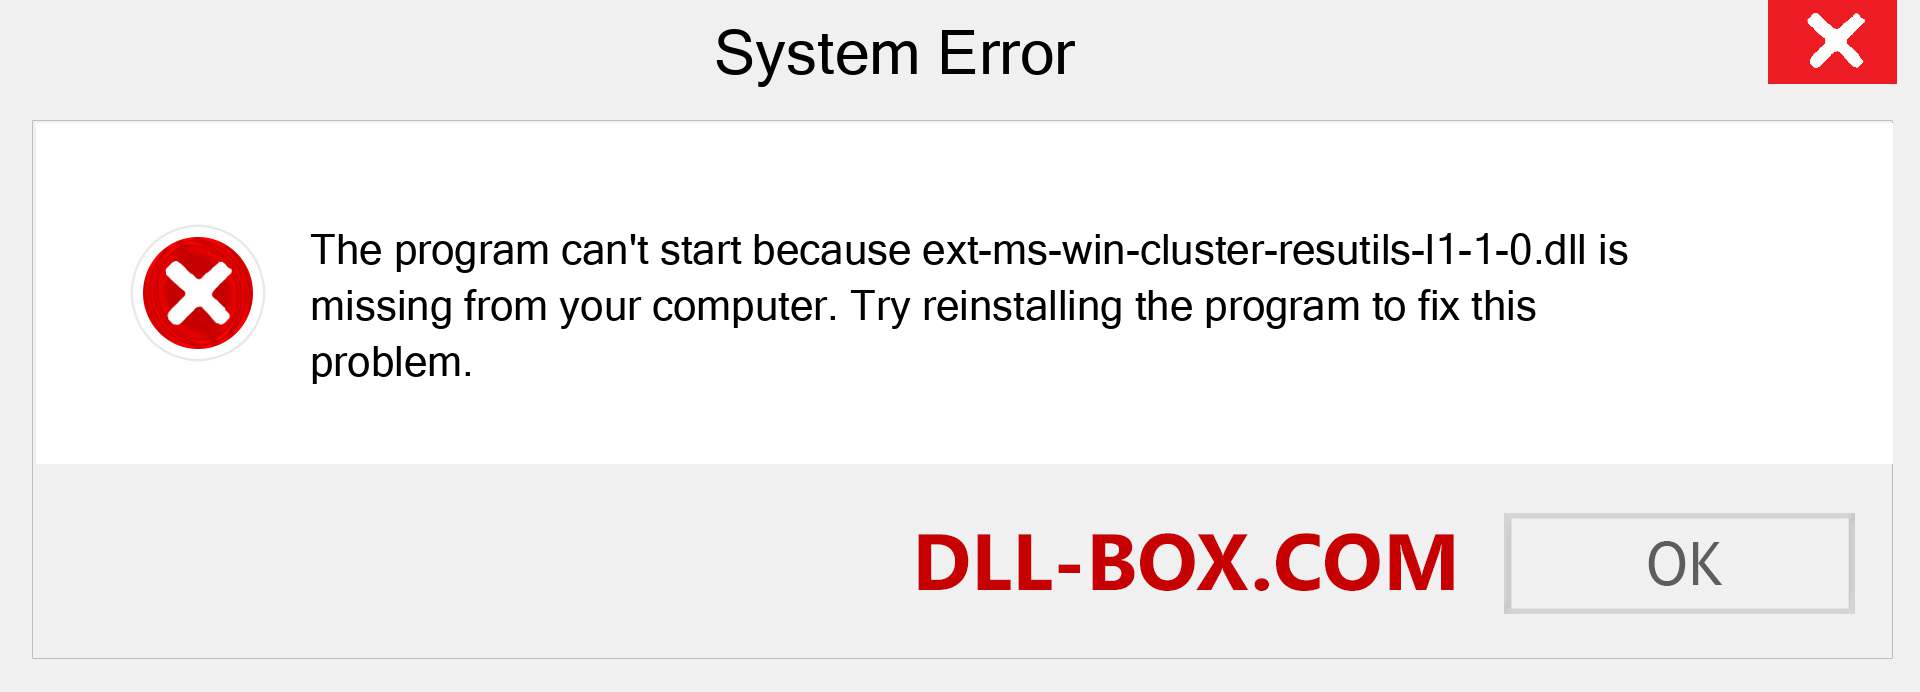  ext-ms-win-cluster-resutils-l1-1-0.dll file is missing?. Download for Windows 7, 8, 10 - Fix  ext-ms-win-cluster-resutils-l1-1-0 dll Missing Error on Windows, photos, images